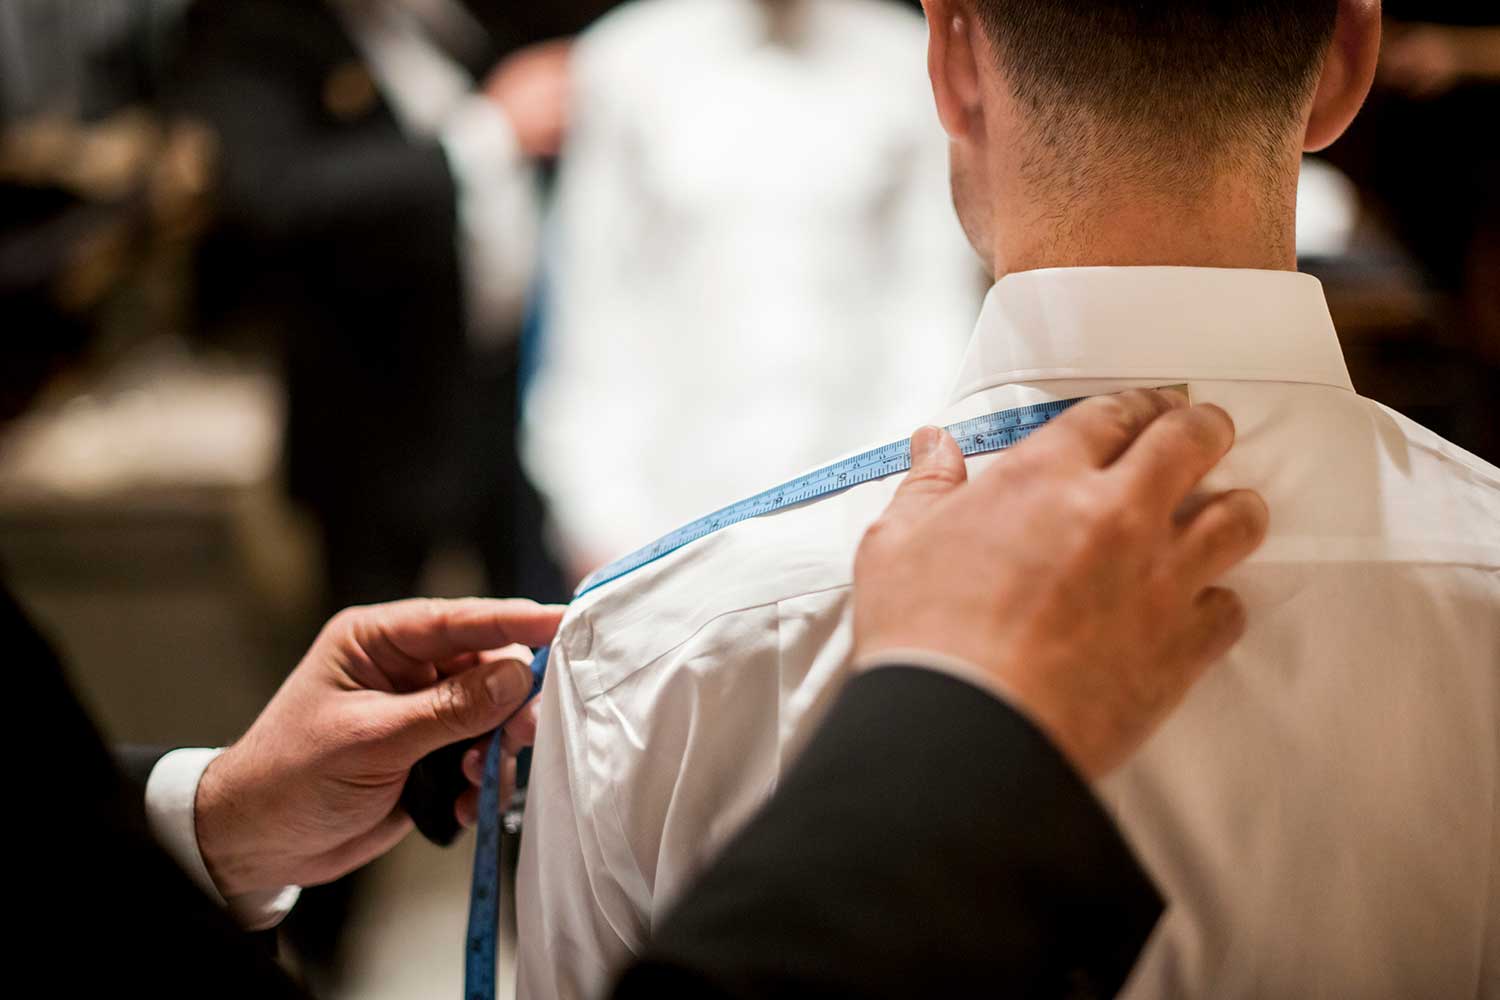 A tailor measures a man's shoulders for a custom or bespoke suit